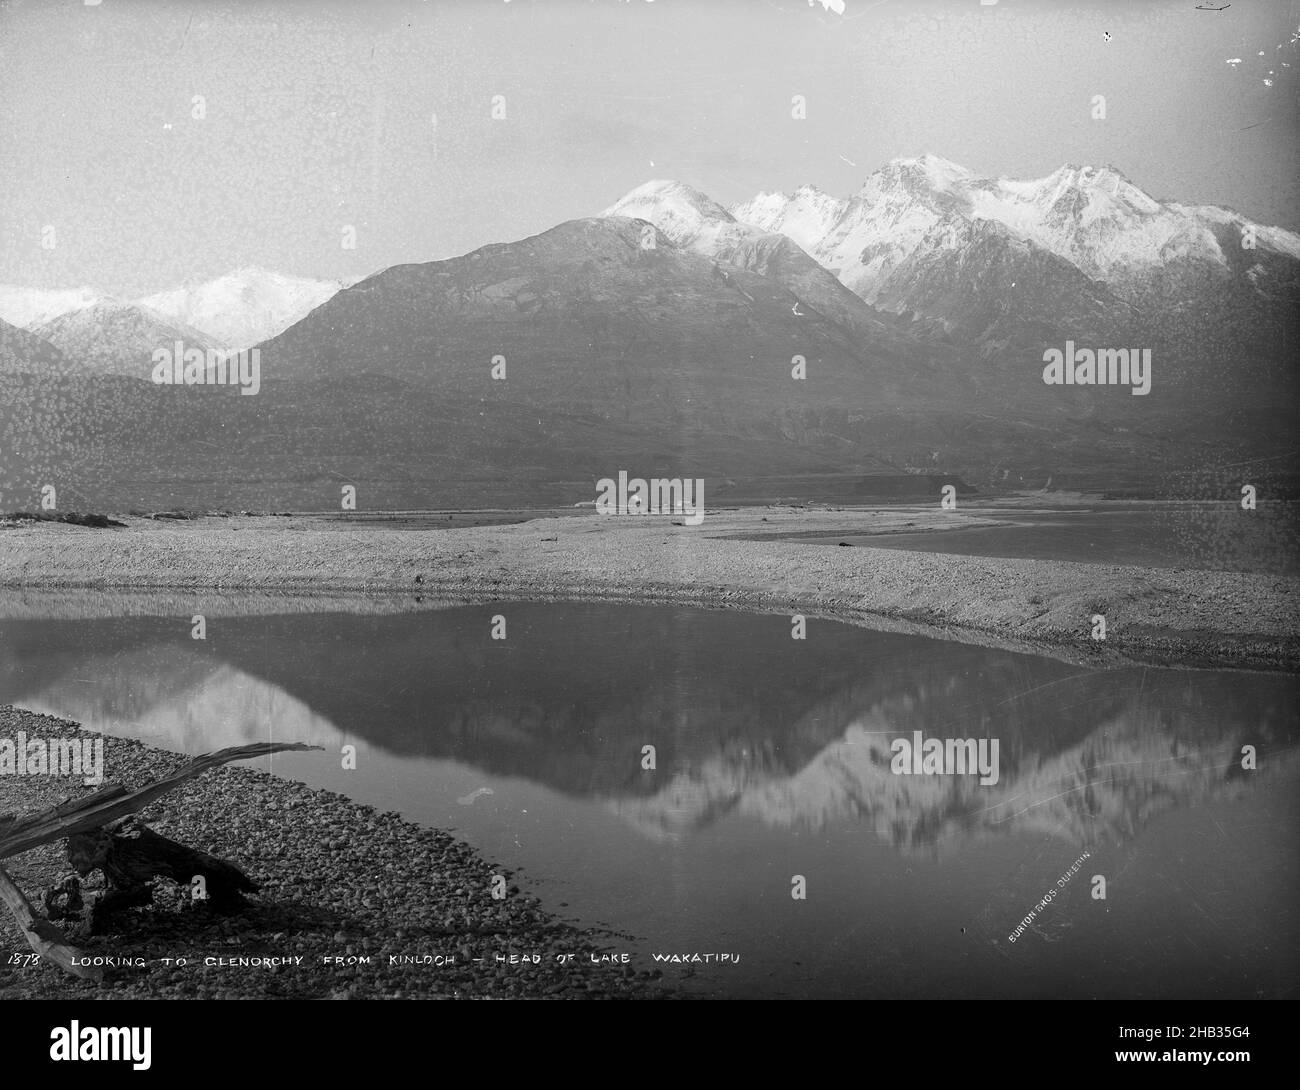 Looking to Glenorchy from Kinloch, head of Lake Wakatipu, Burton Brothers studio, photography studio, 1883, New Zealand, black-and-white photography, View of snow-capped mountains over a small body of water, with the mountains reflected in this water. A piece of driftwood enters the frame at extreme bottom left Stock Photo